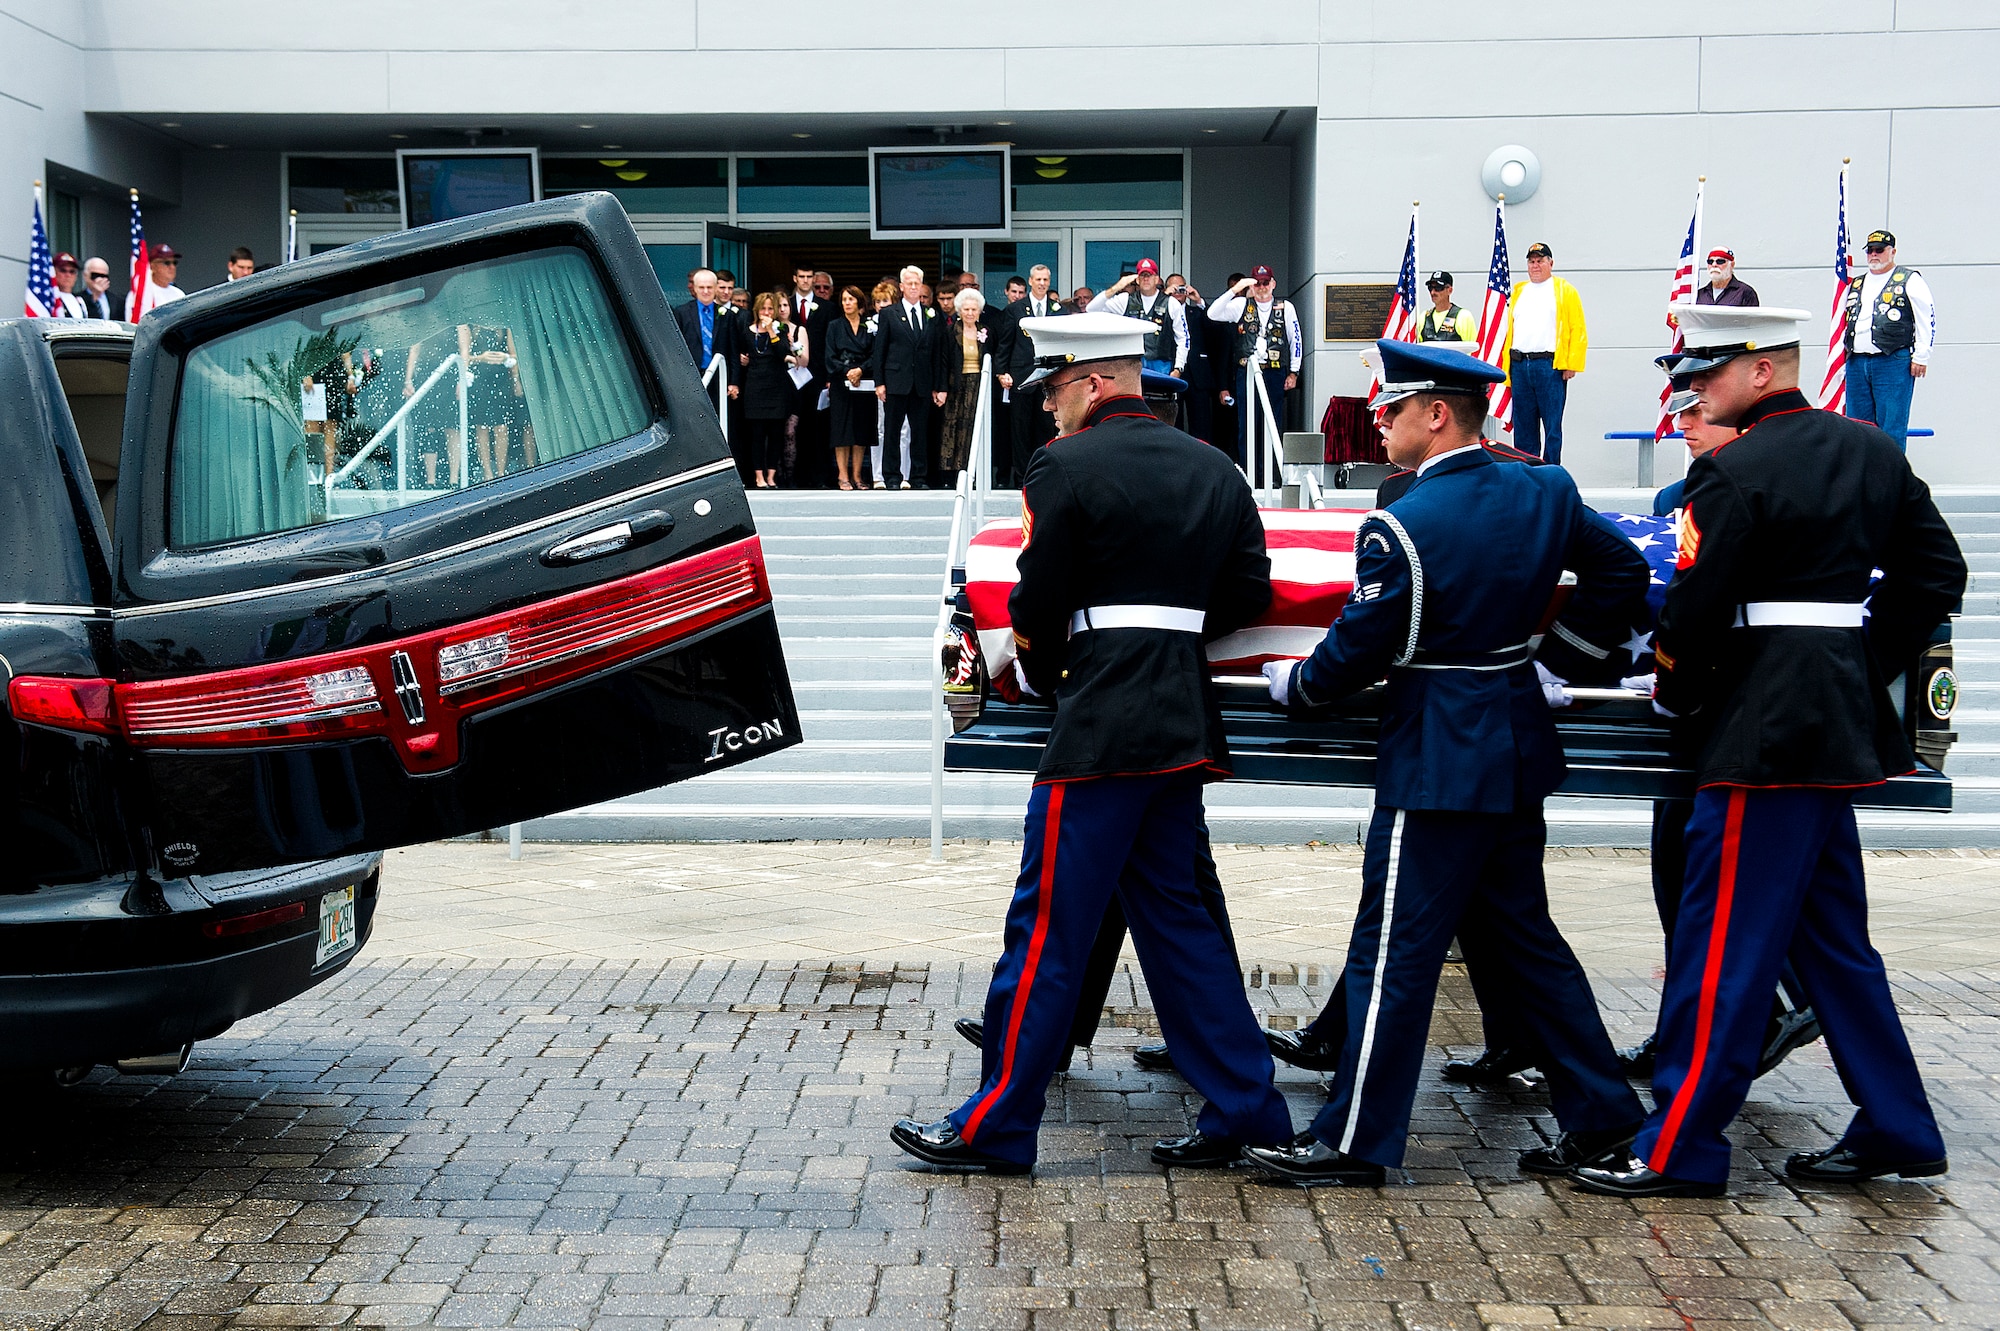 Pallbearers made up of Airmen and Marines carried the casket out during a memorial service for retired U.S. Air Force Col. George “Bud” Day at the Emerald Coast Convention Center on Okaloosa Island, Fla., Aug. 1. Day, a Medal of Honor recipient and combat pilot with service in World War II, Korea and Vietnam, passed away July 28 at the age of 88. (U.S. Air Force Photo / Airman 1st Class Christopher Callaway)